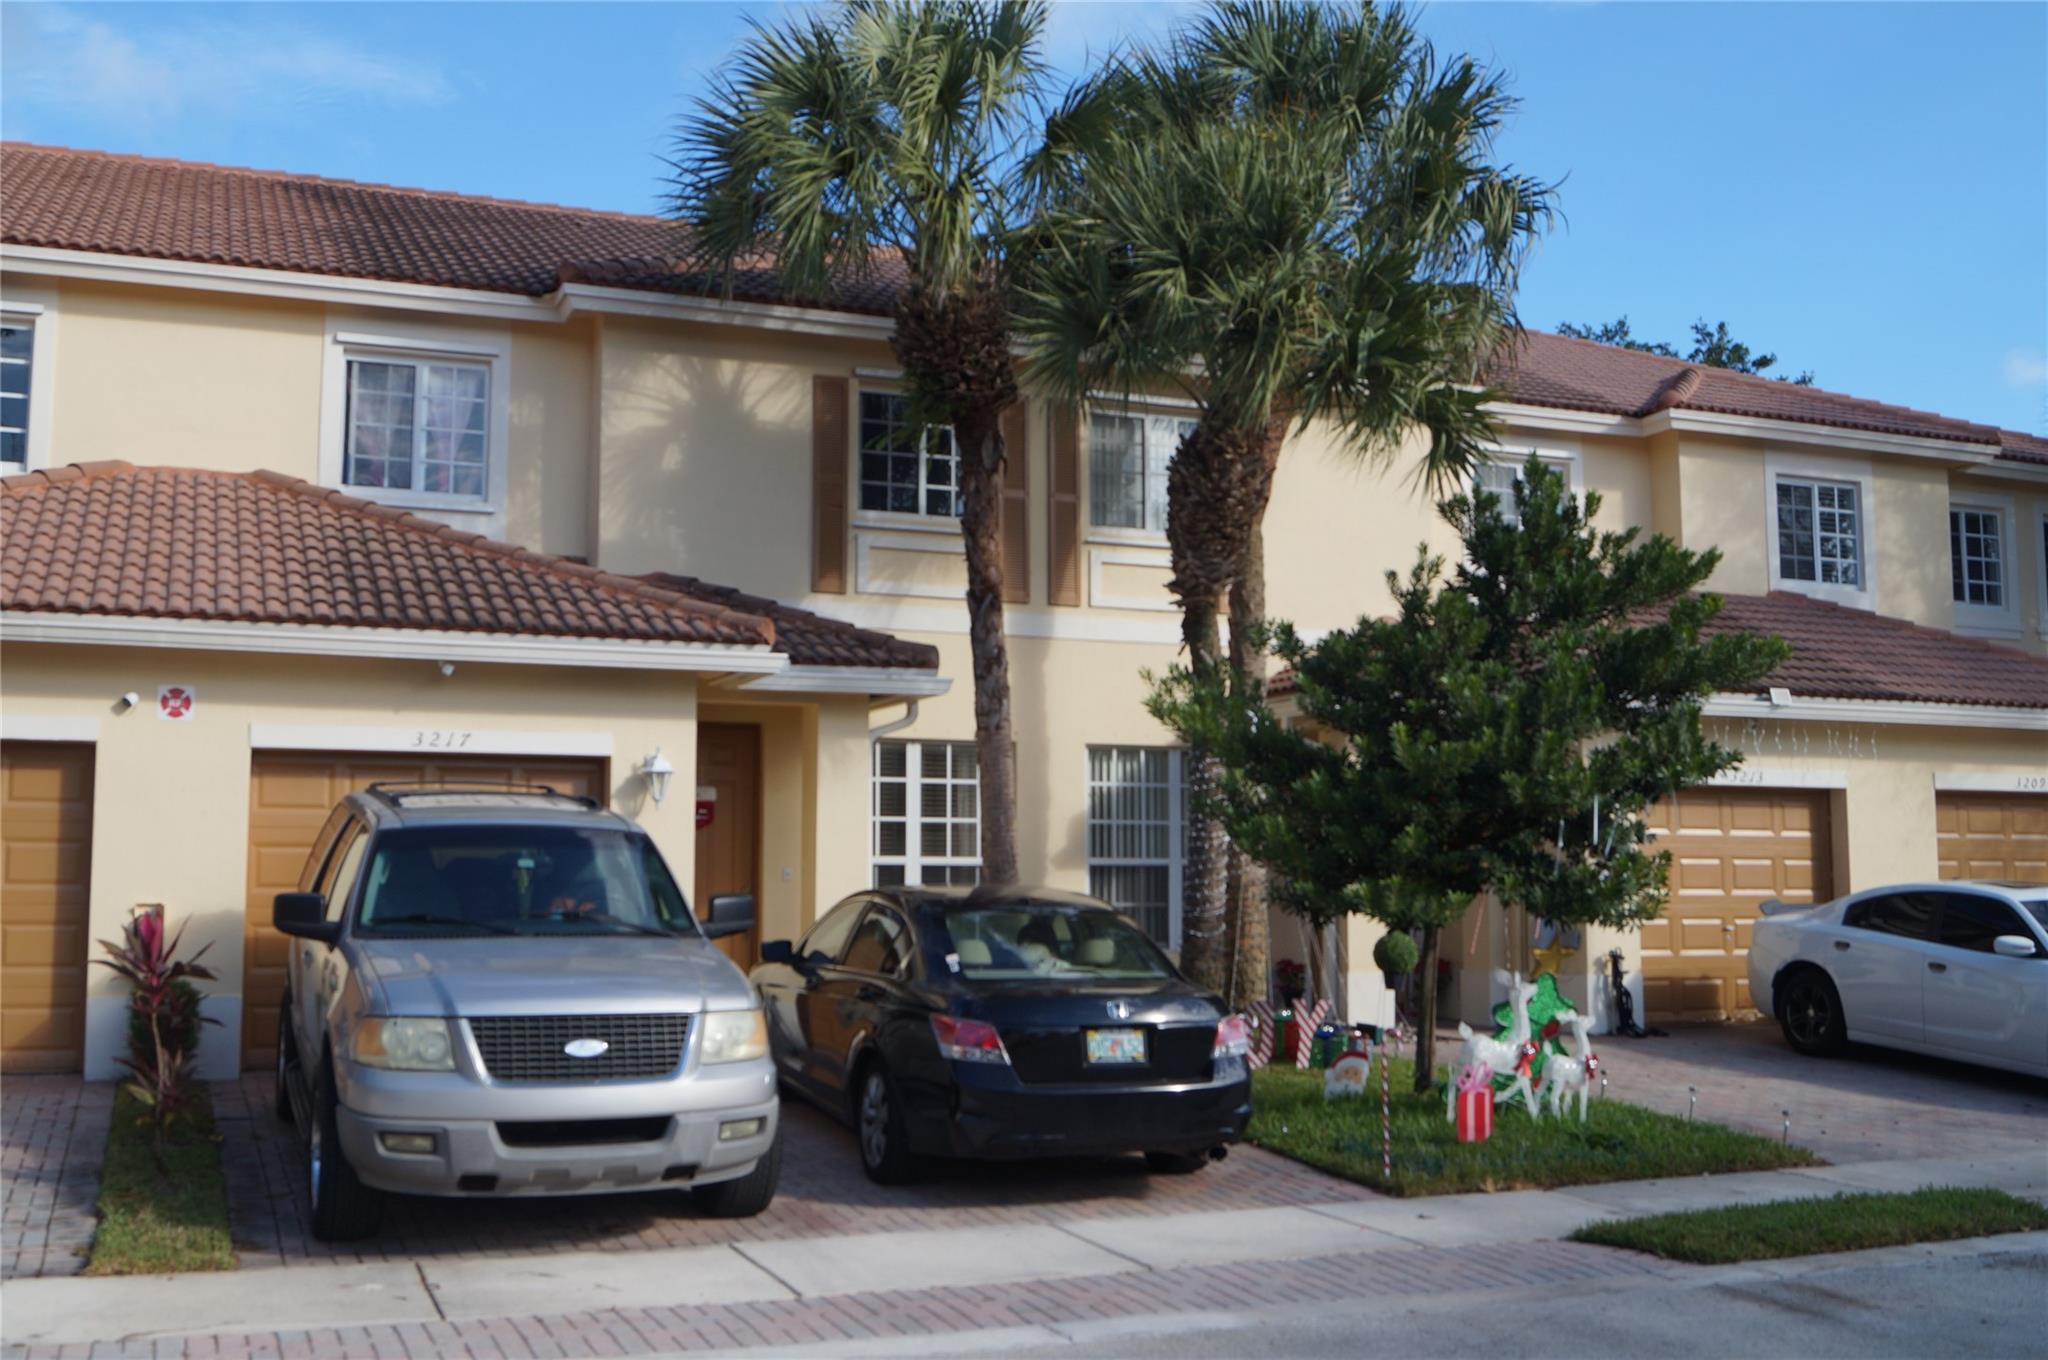 View Oakland Park, FL 33309 townhome